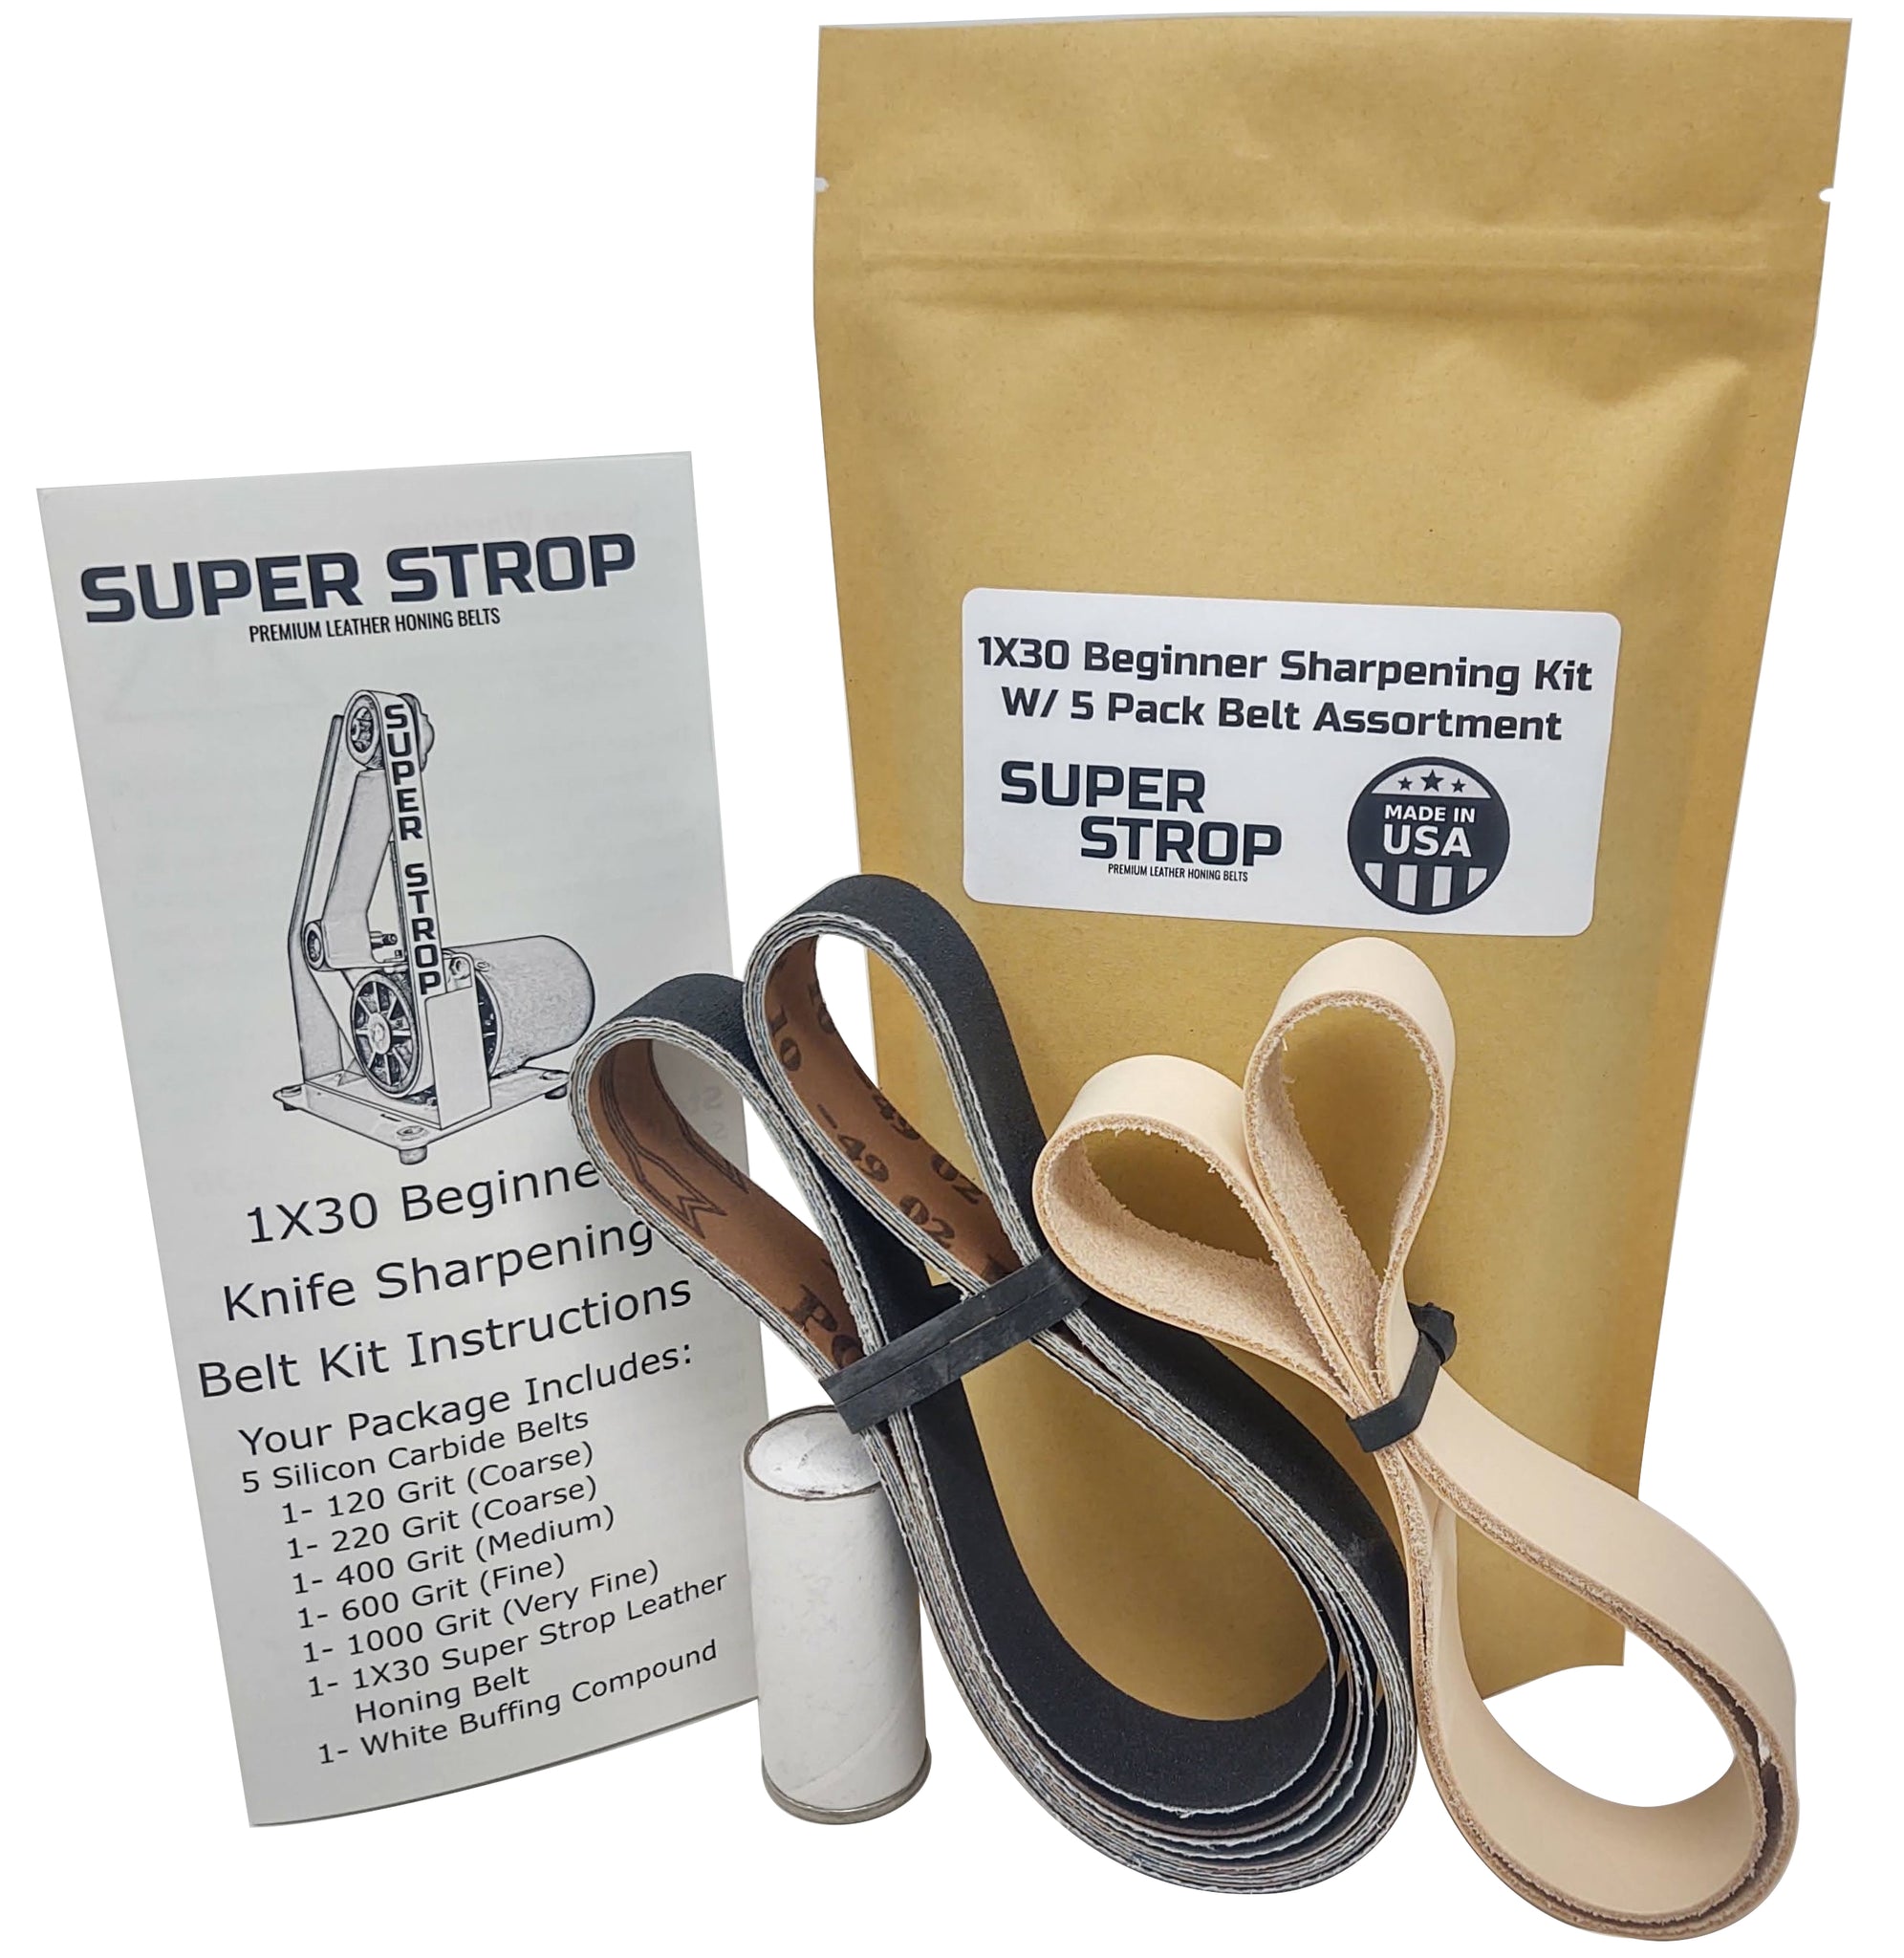 How to Sharpen & Strop Leather Tools